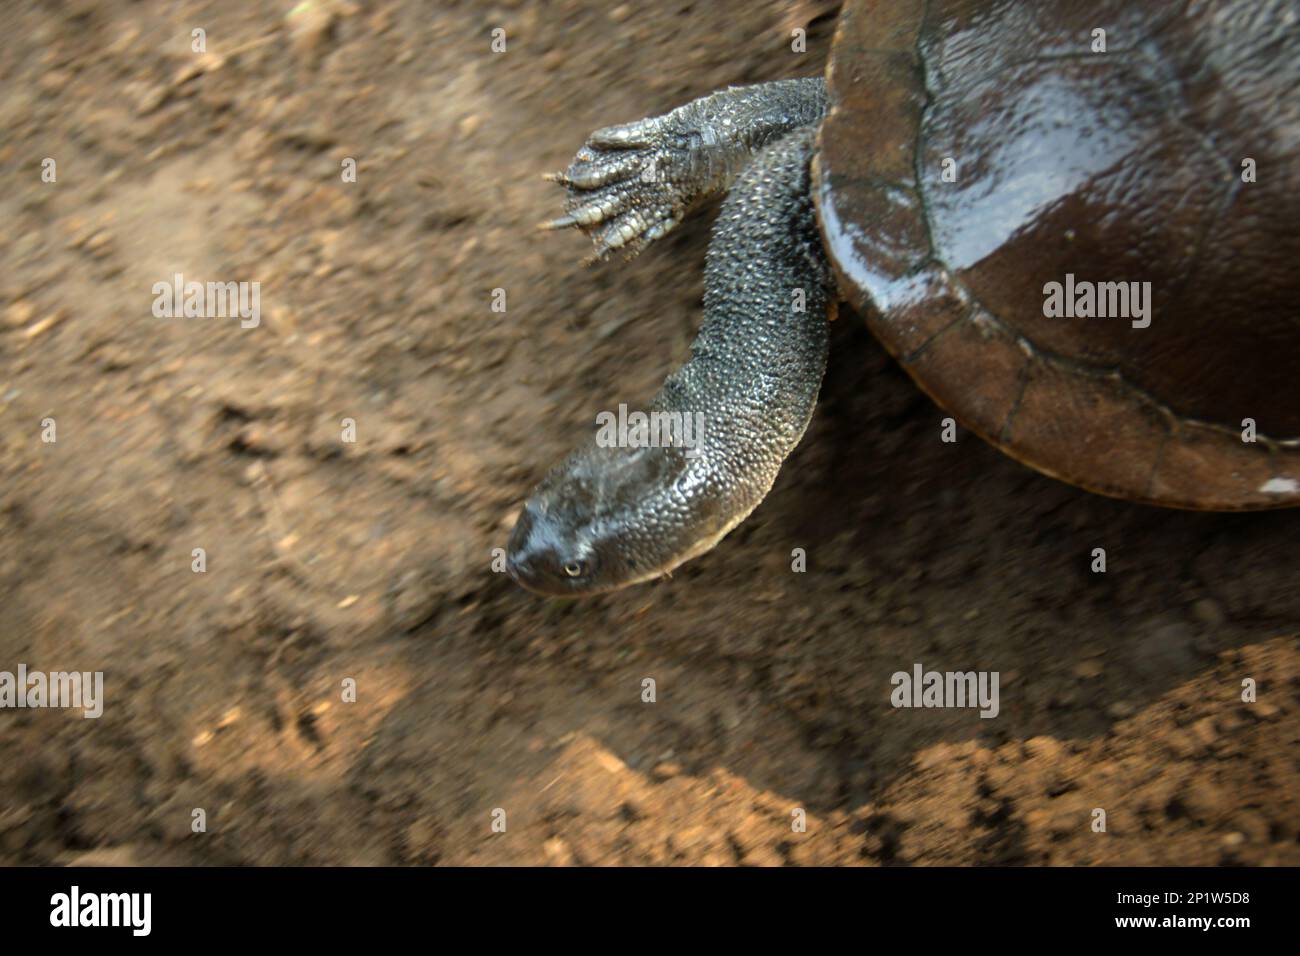 A rare and threatened species of freshwater turtle, the critically endangered Rote Island's endemic snake-necked turtle (Chelodina mccordi) is photographed at a licensed ex-situ breeding facility in Jakarta, Indonesia. 'The Rote Island snake-necked turtle is one glaring example of how unsustainable trade has brought entire species to the brink of extinction,' said Jim Breheny, Wildlife Conservation Society (WCS) Executive Vice President and Director of the Bronx Zoo as published by WCS Newsroom on September 7, 2022. Stock Photo